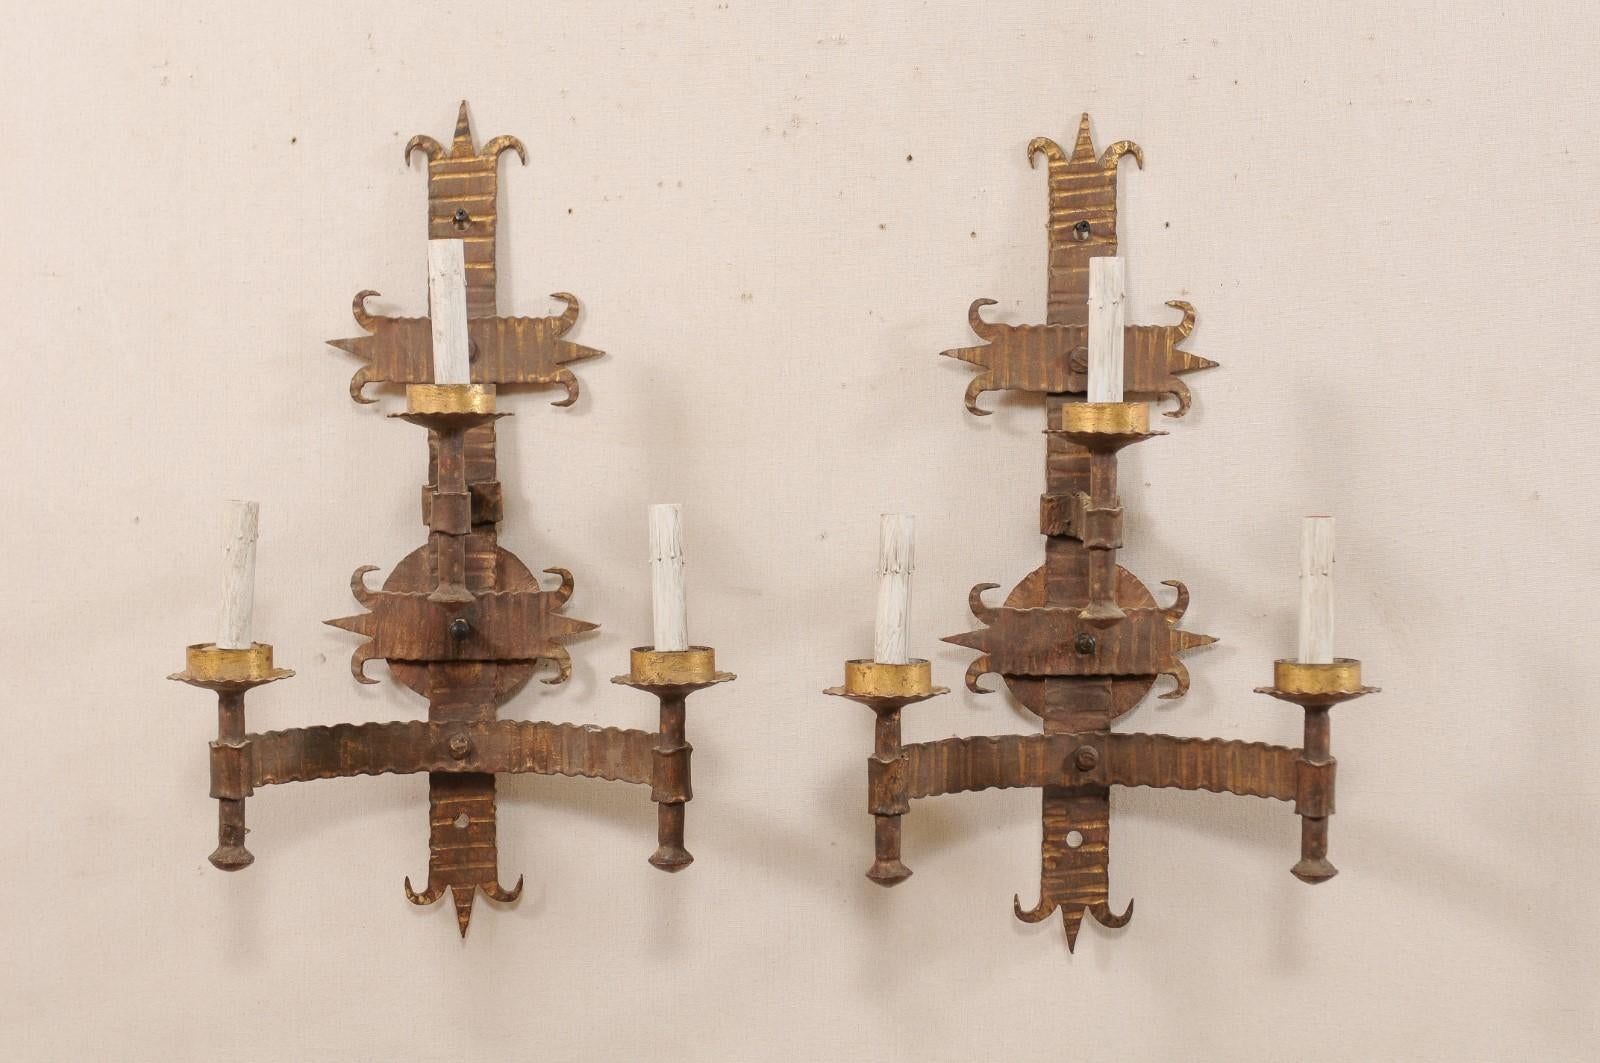 A pair of French mid-20th century forged-iron three-light sconces. These vintage French hand forged sconces each have two torch-style lights set at the farthest ends of a horizontally set C-shaped arm, with the third light, positioned higher at